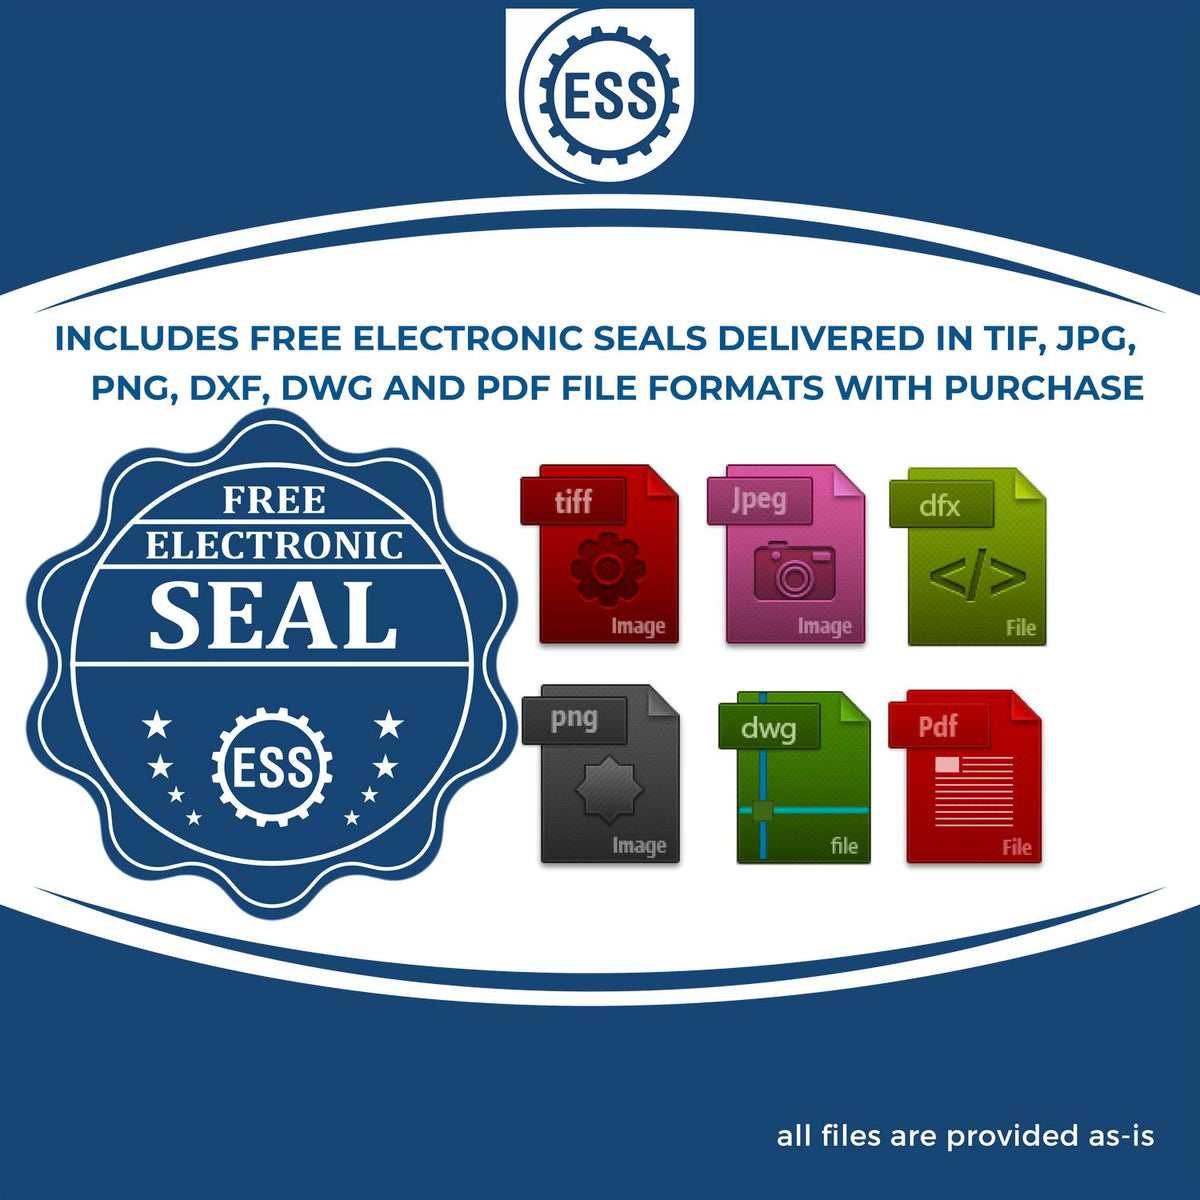 An infographic for the free electronic seal for the Slim Pre-Inked Michigan Architect Seal Stamp illustrating the different file type icons such as DXF, DWG, TIF, JPG and PNG.